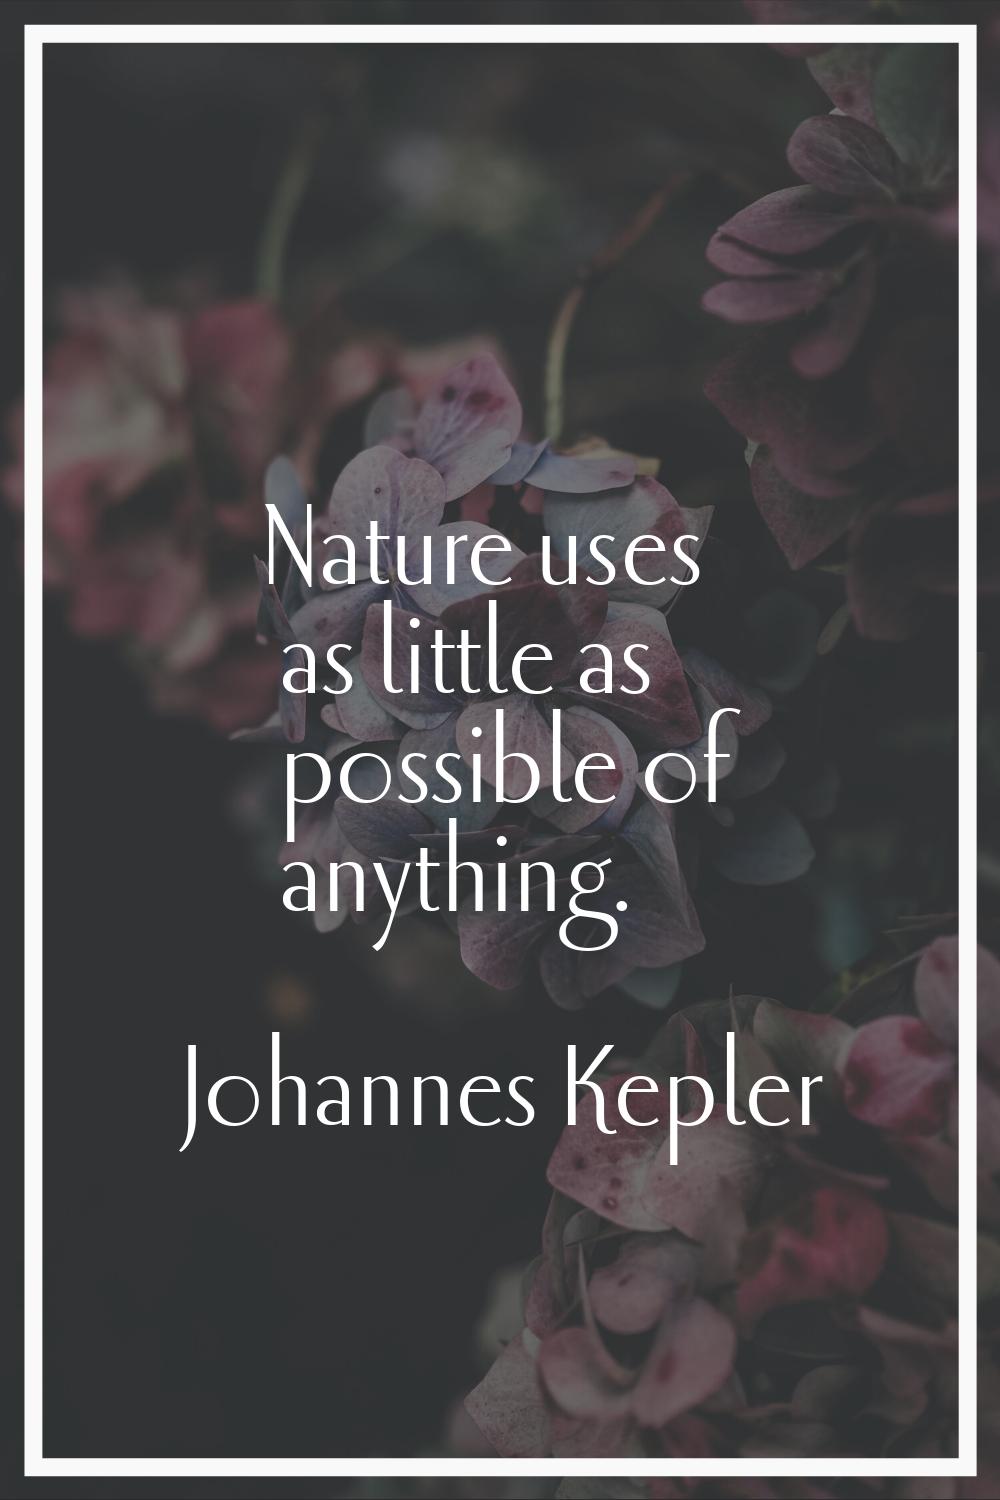 Nature uses as little as possible of anything.